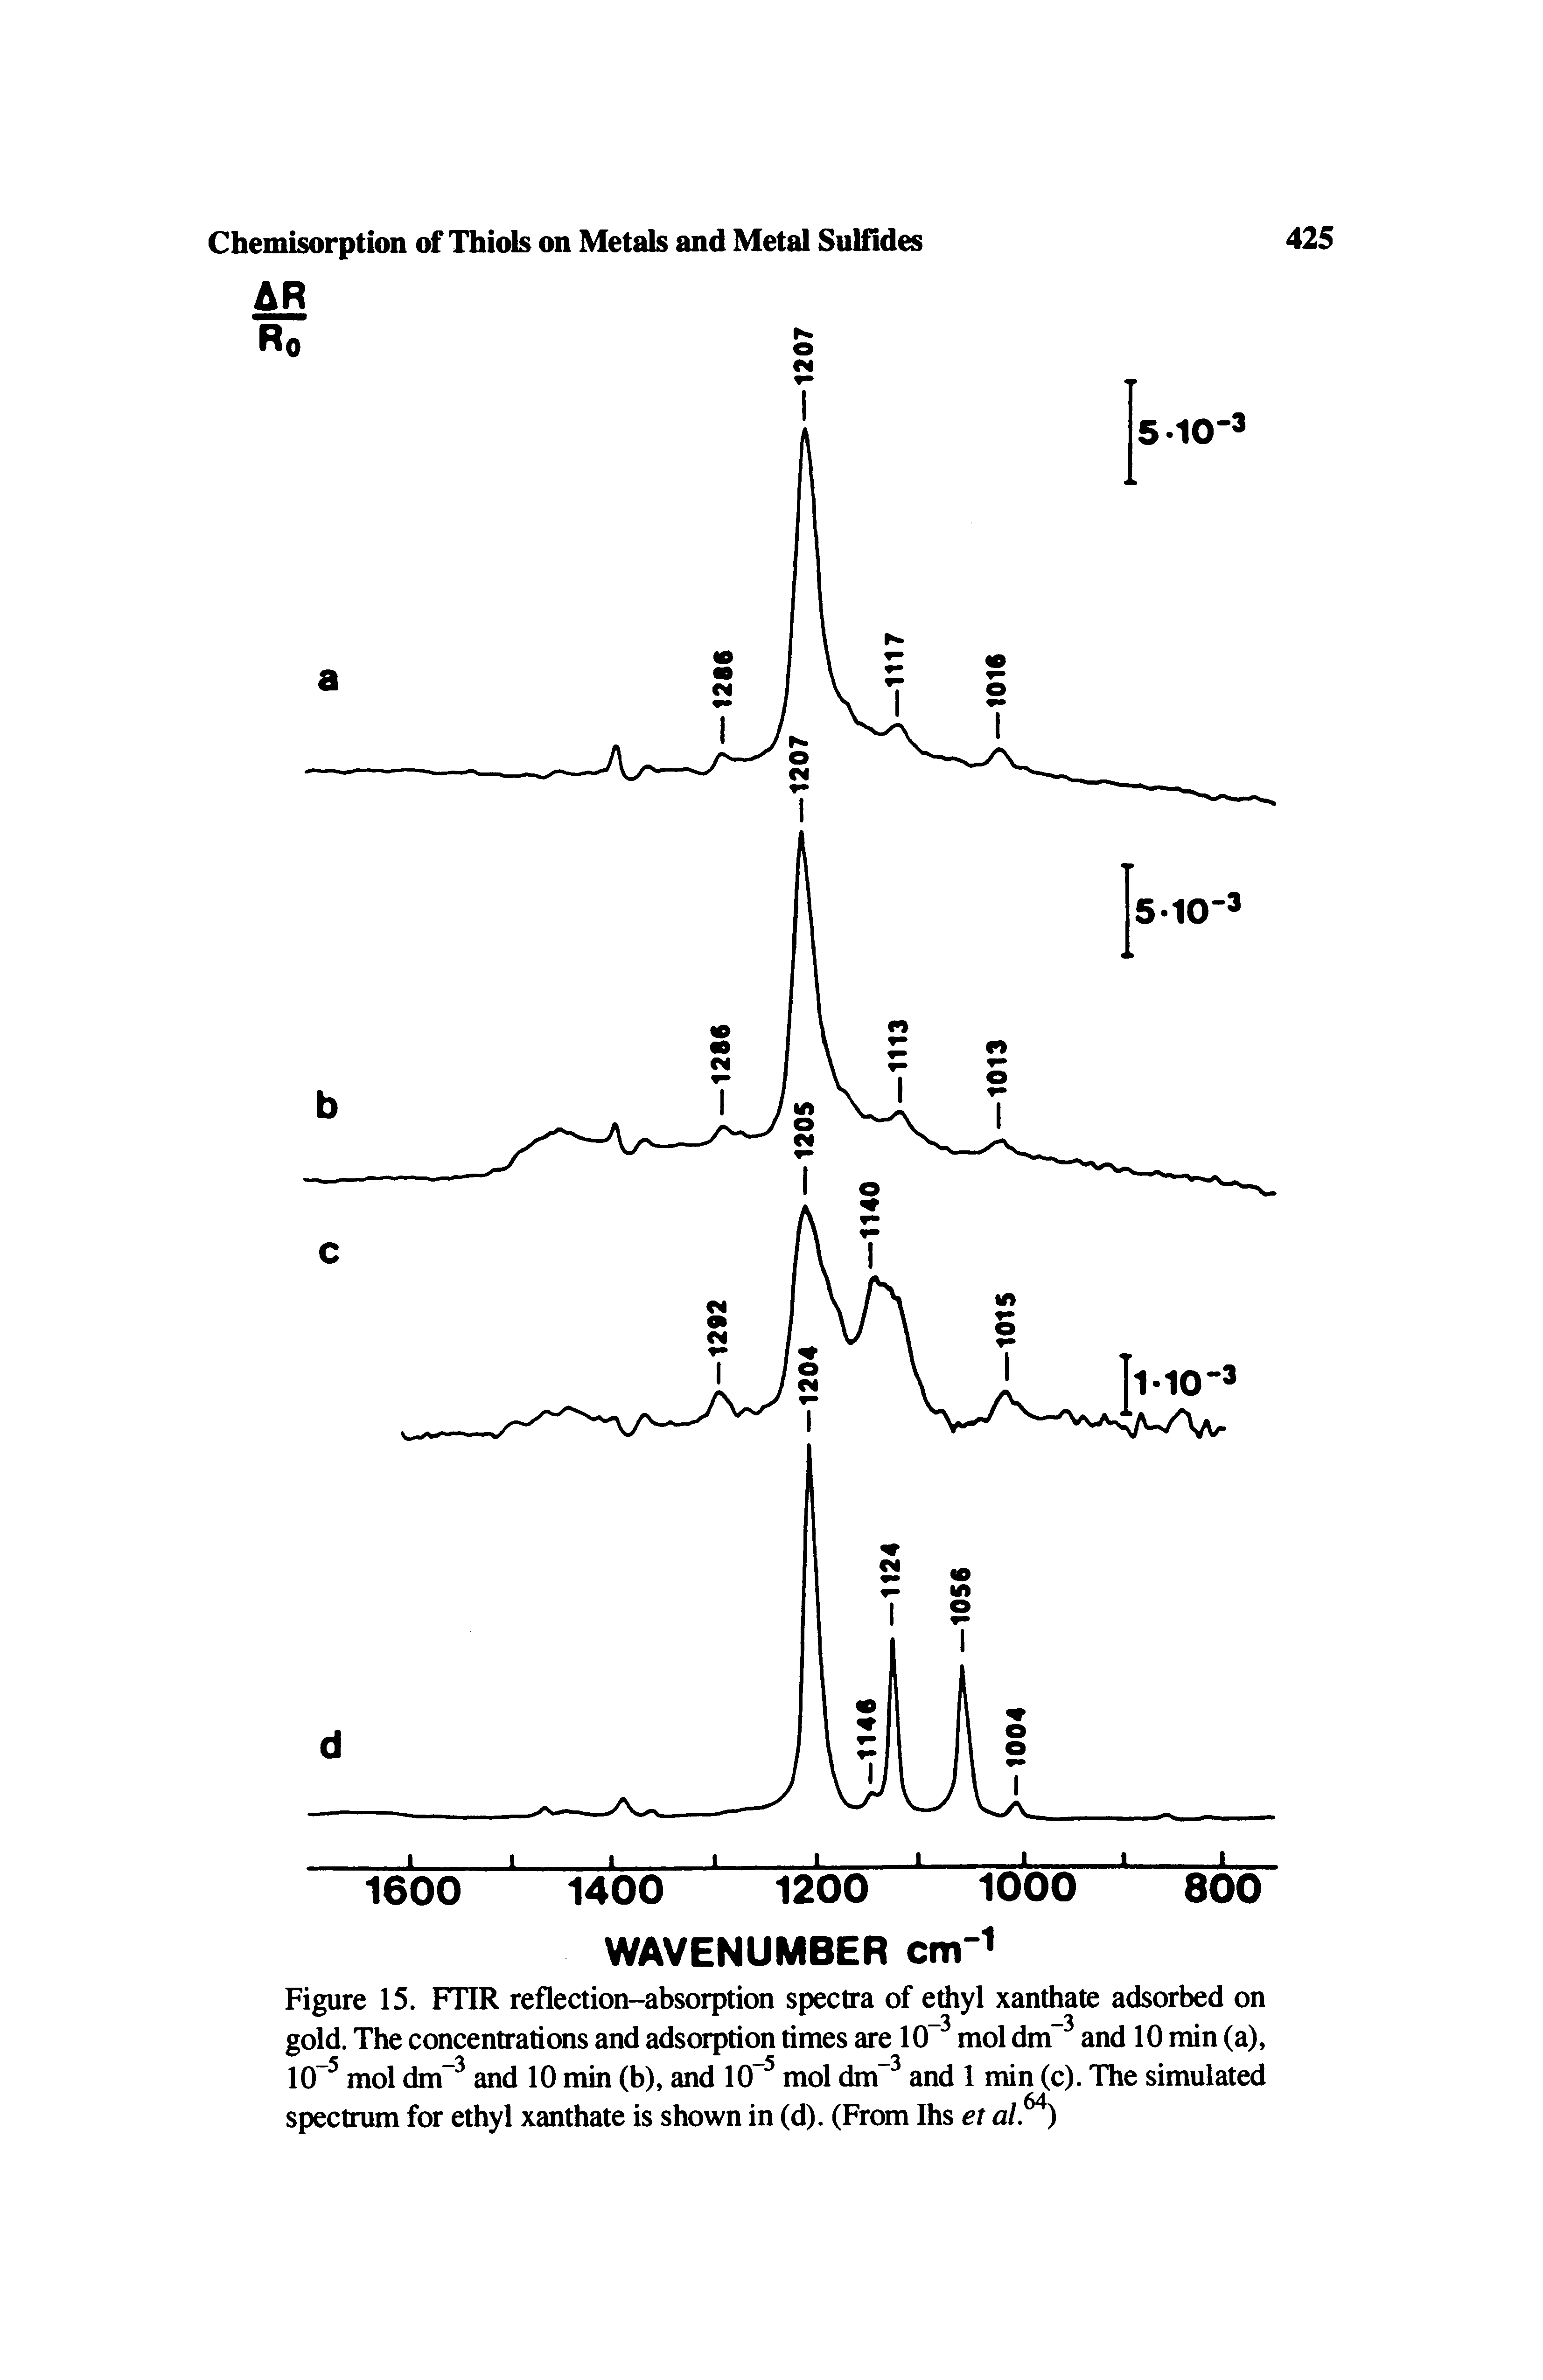 Figure 15. FTIR reflection-absorption spectra of ethyl xanthate adsorbed on gold. The concentrations and adsorption times are 10 mol dm and 10 min (a), 10" mol dm and 10 min (b), and 10 mol dm and 1 min (c). The simulated spectrum for ethyl xanthate is shown in (d). (From Ihs et al. )...